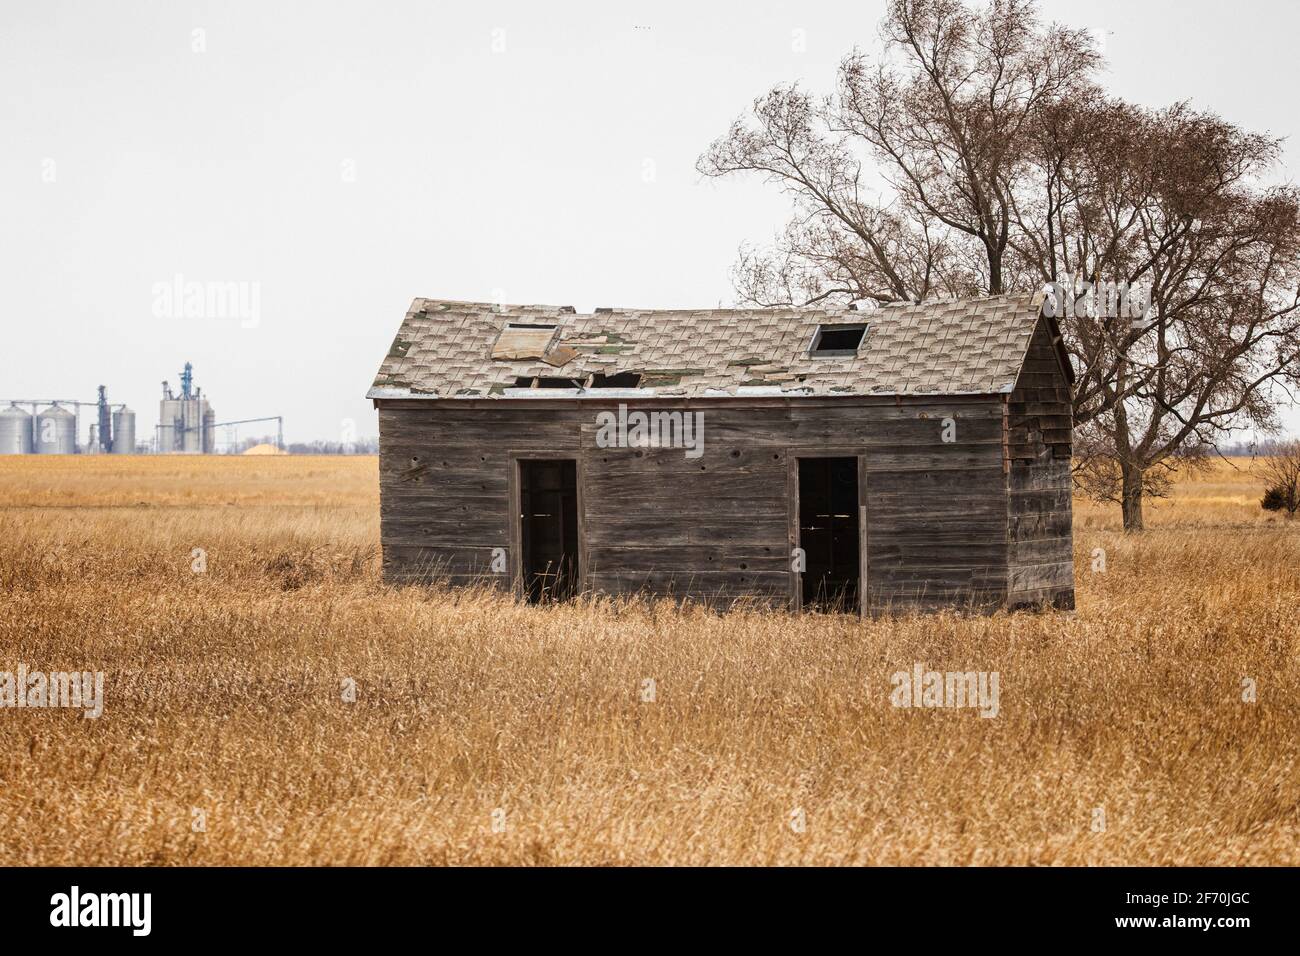 A badly damaged shed on an abandoned small farm makes for an ironic foreground to the massive new grainery in the background.  South Dakota prairies. Stock Photo